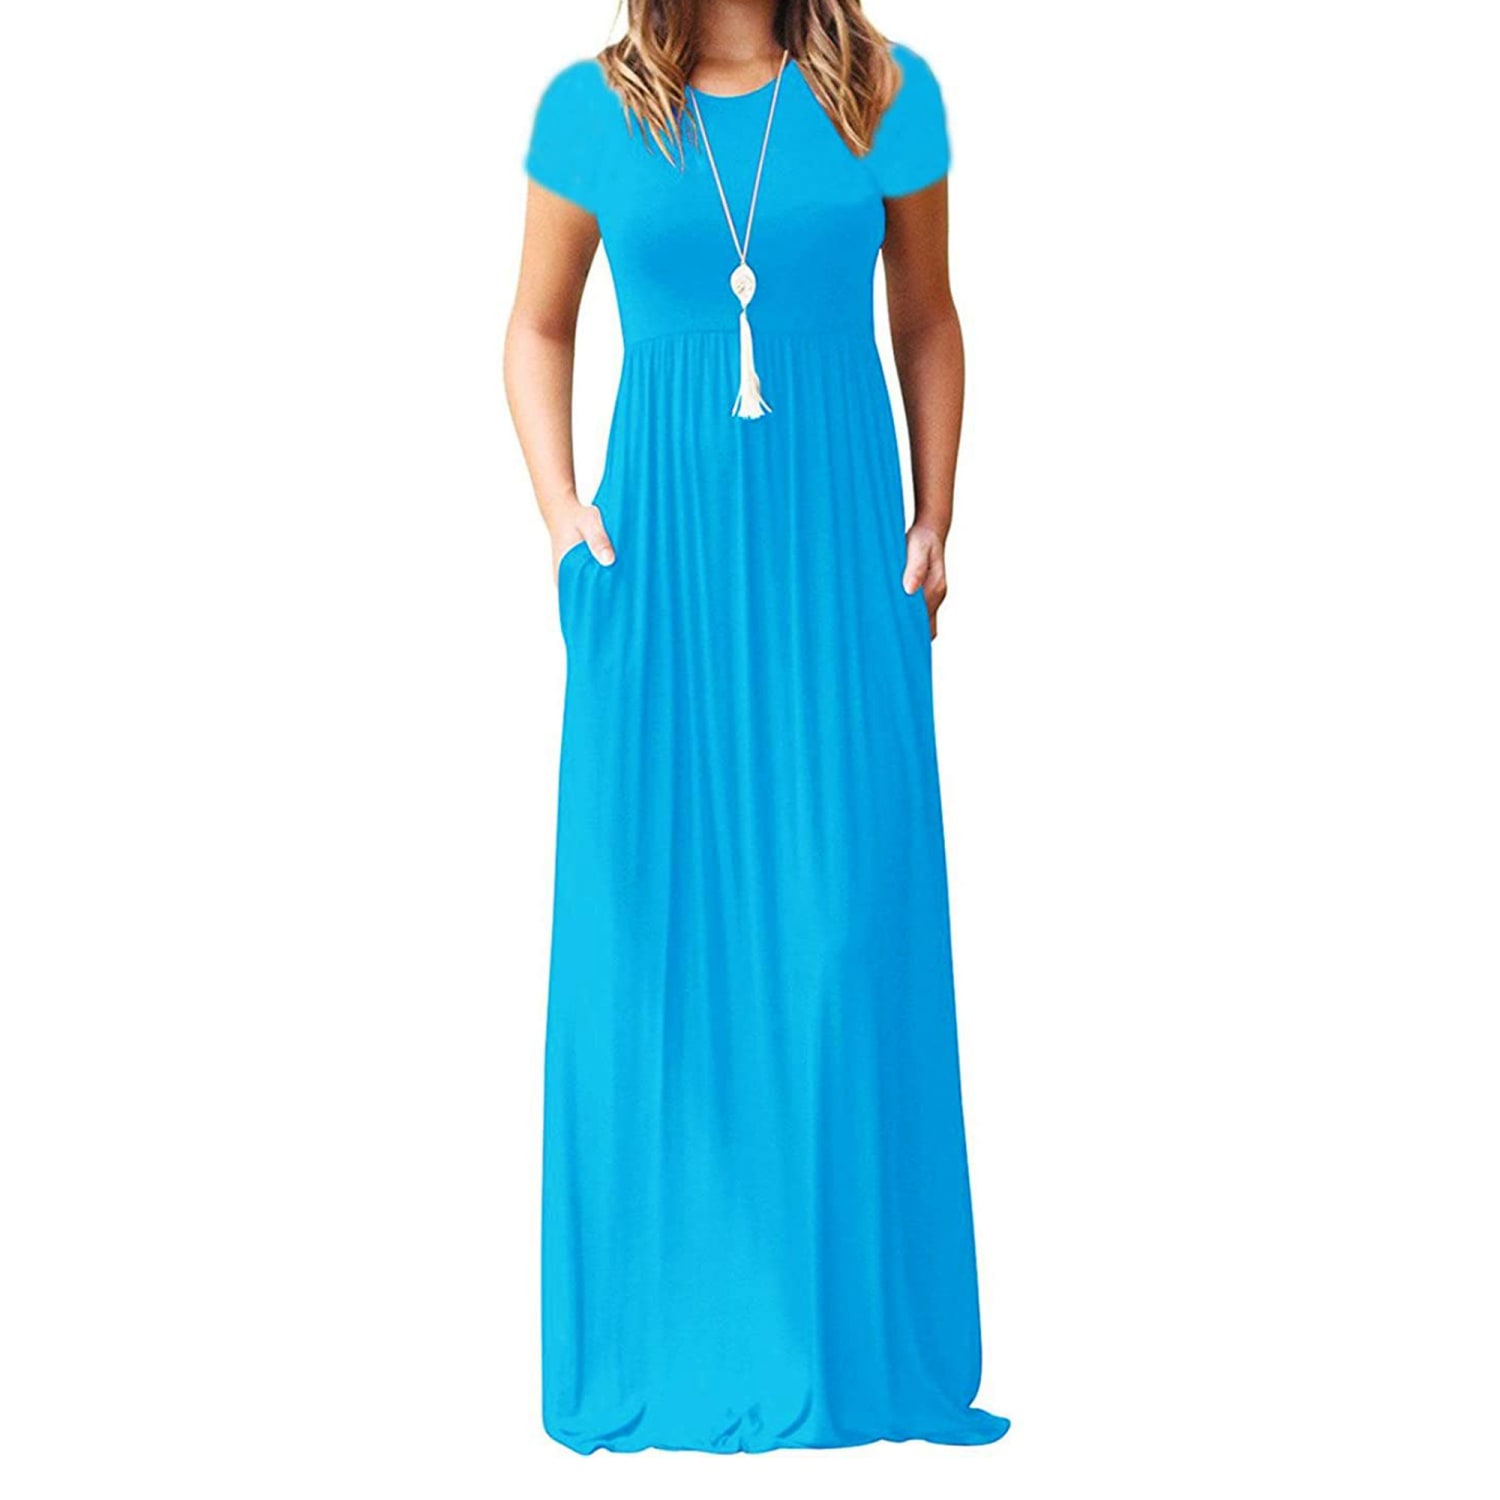 We tried this short-sleeve maxi dress ...